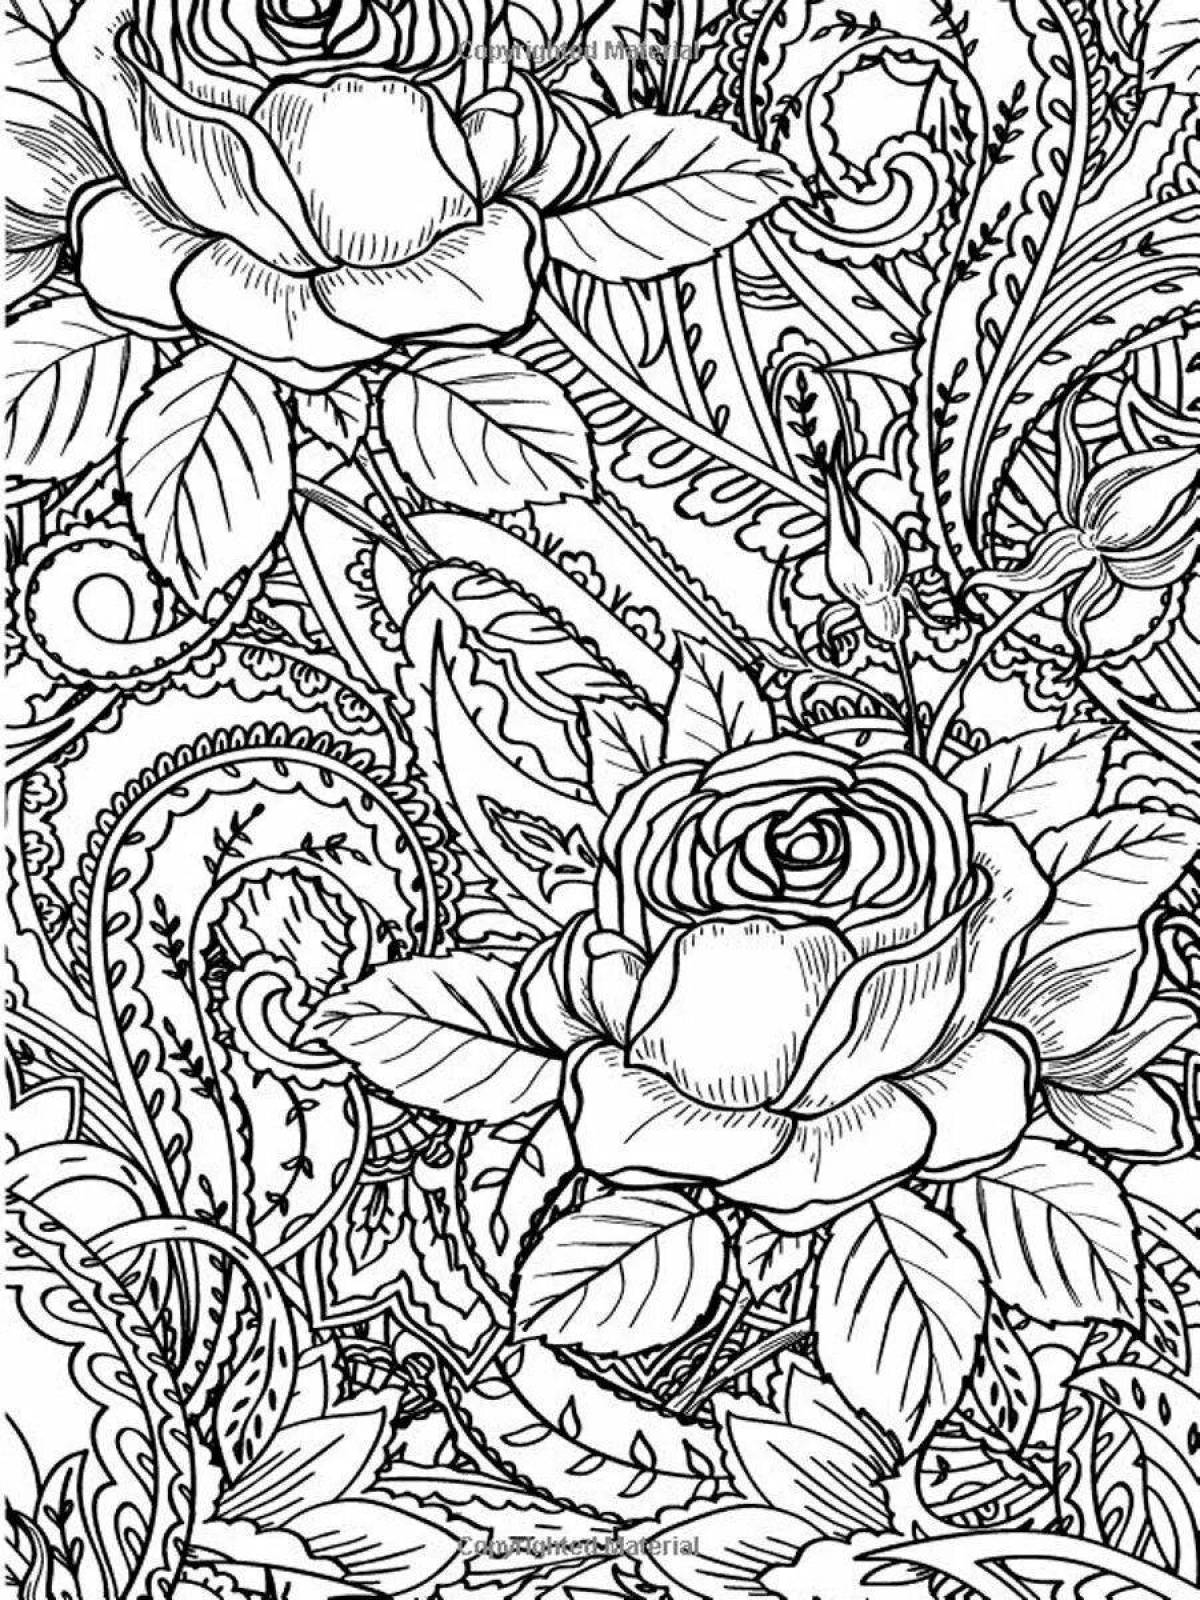 Ornate coloring book beautiful and complex flowers